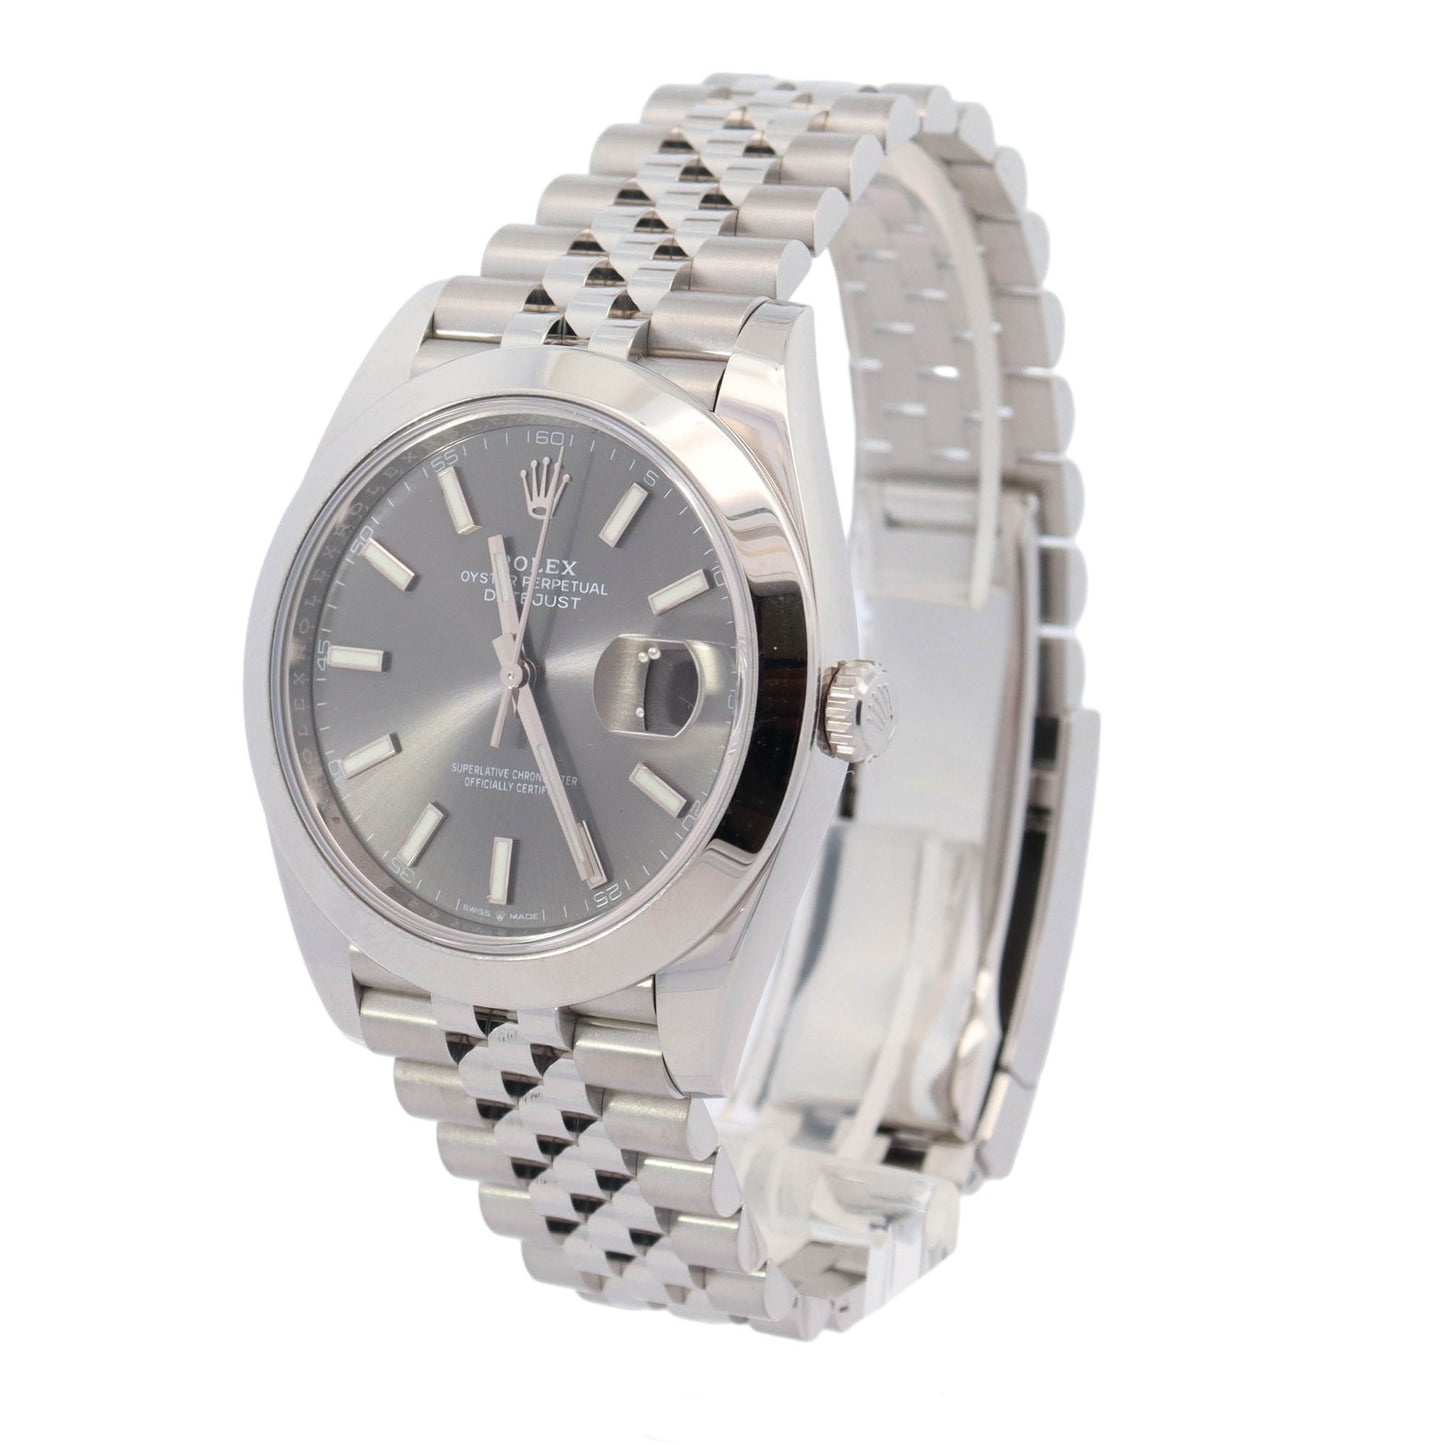 Rolex Datejust Stainless Steel 41mm Rhodium Stick Dial Watch Reference #: 126300